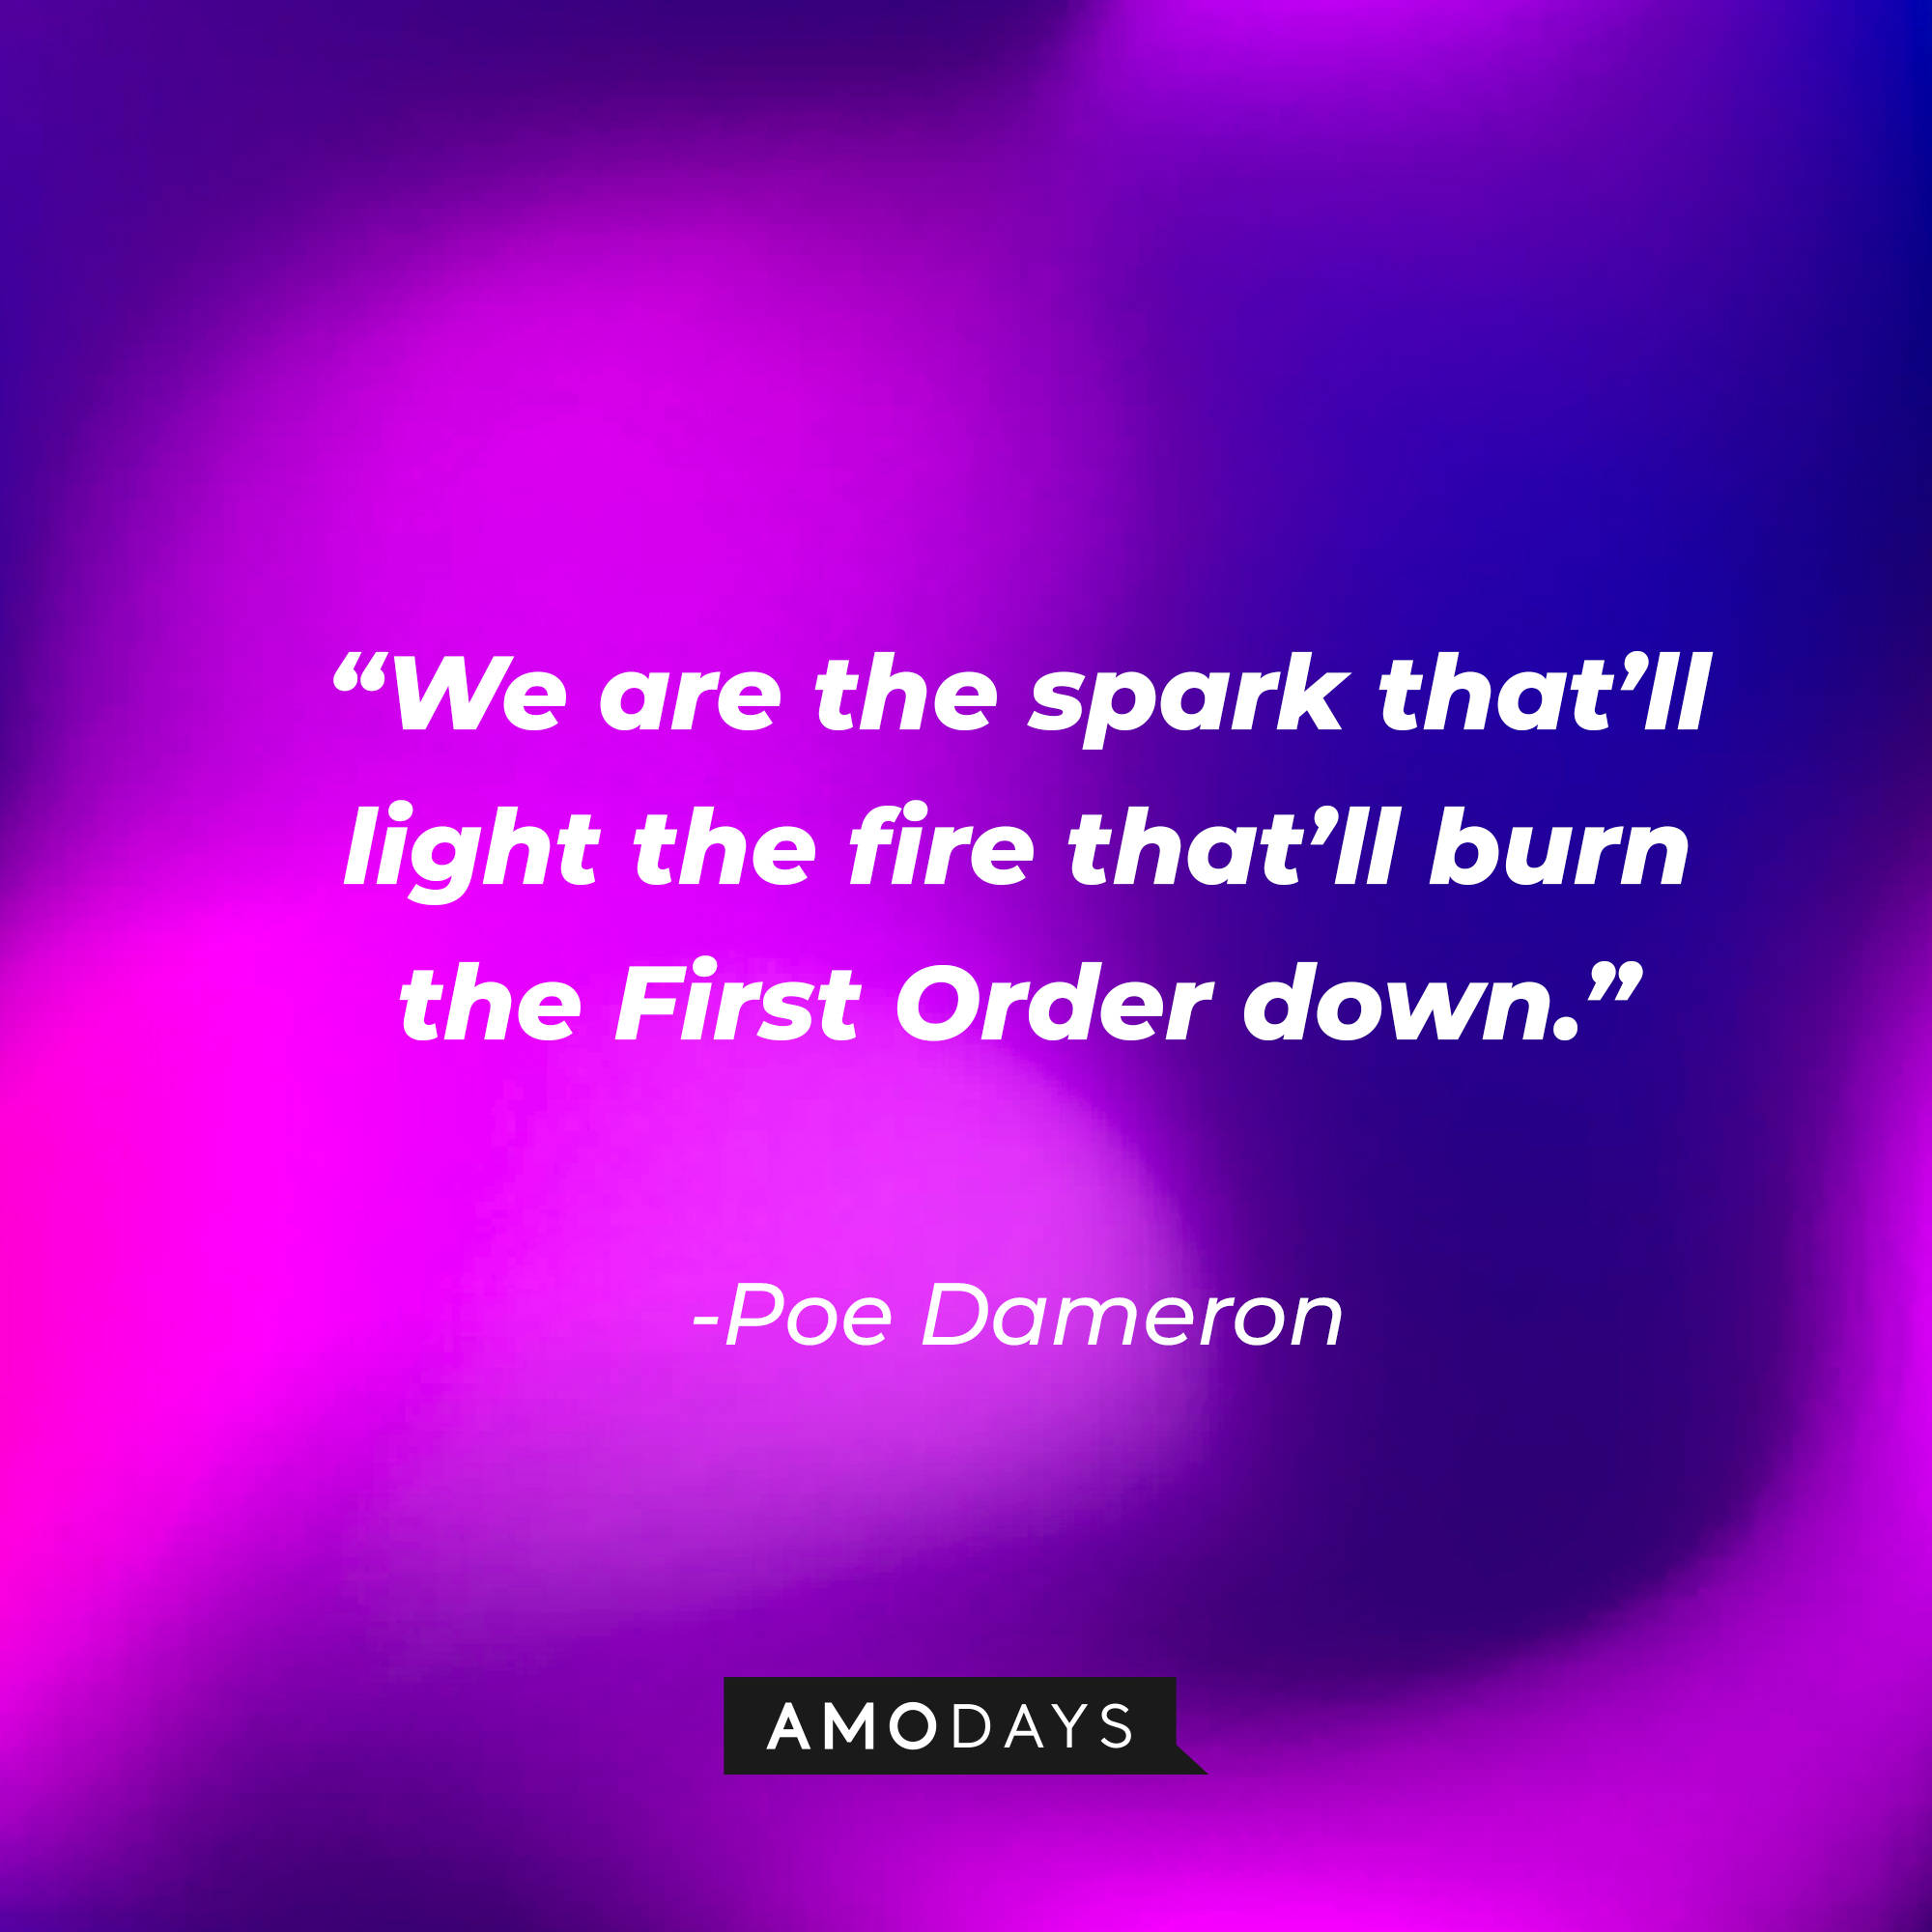 Poe Dameron’s quote: “We are the spark that’ll light the fire that’ll burn the First Order down.” | Source: AmoDays